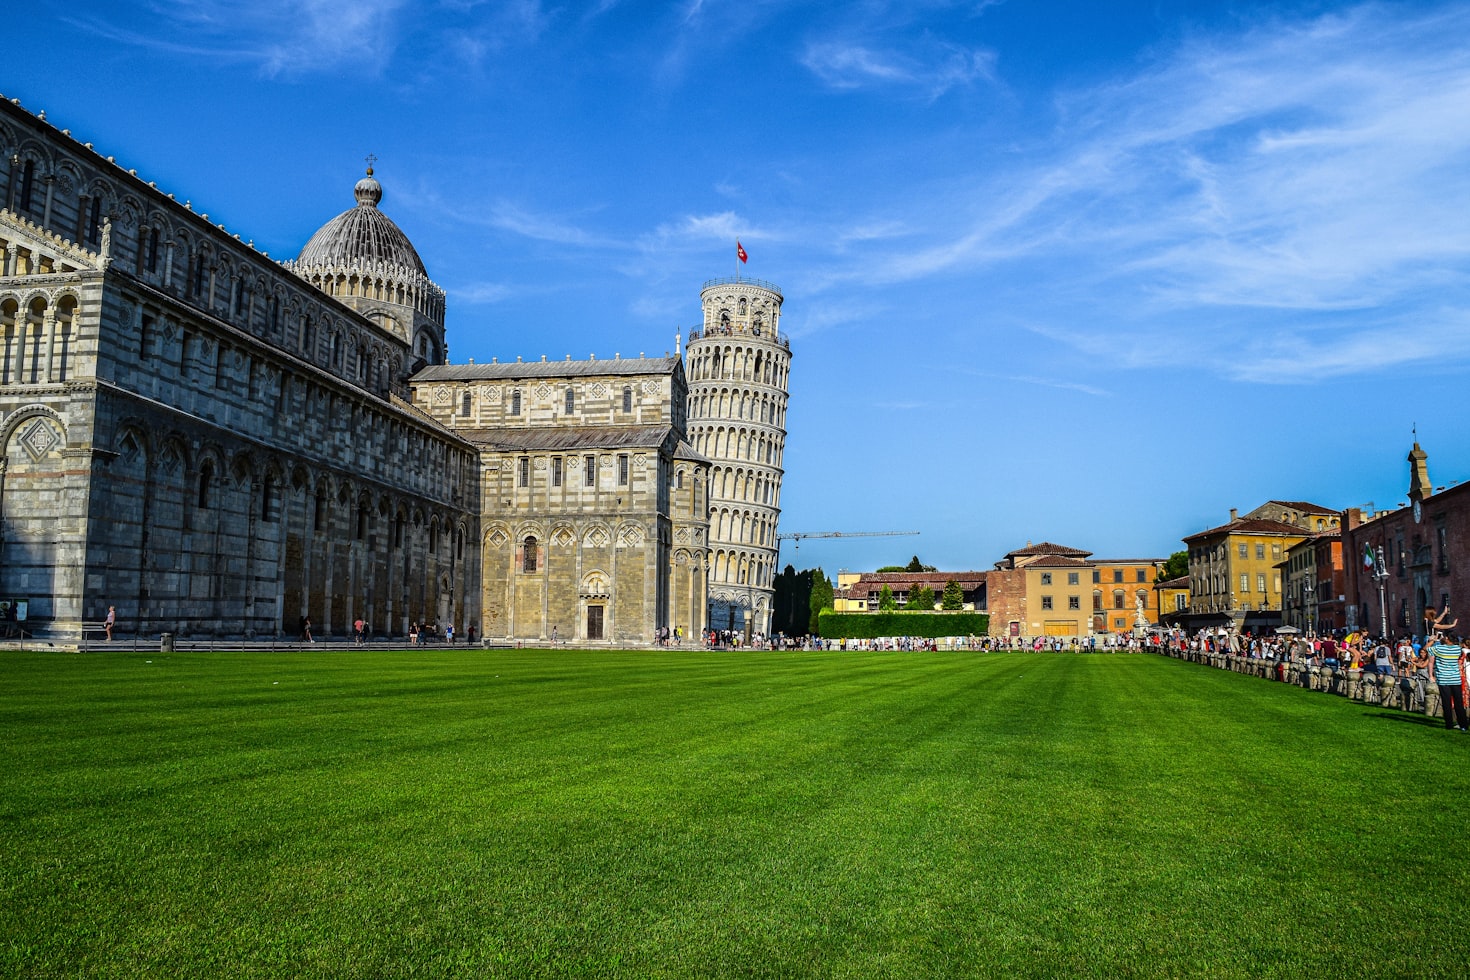 The Leaning Tower of Pisa is not actually leaning